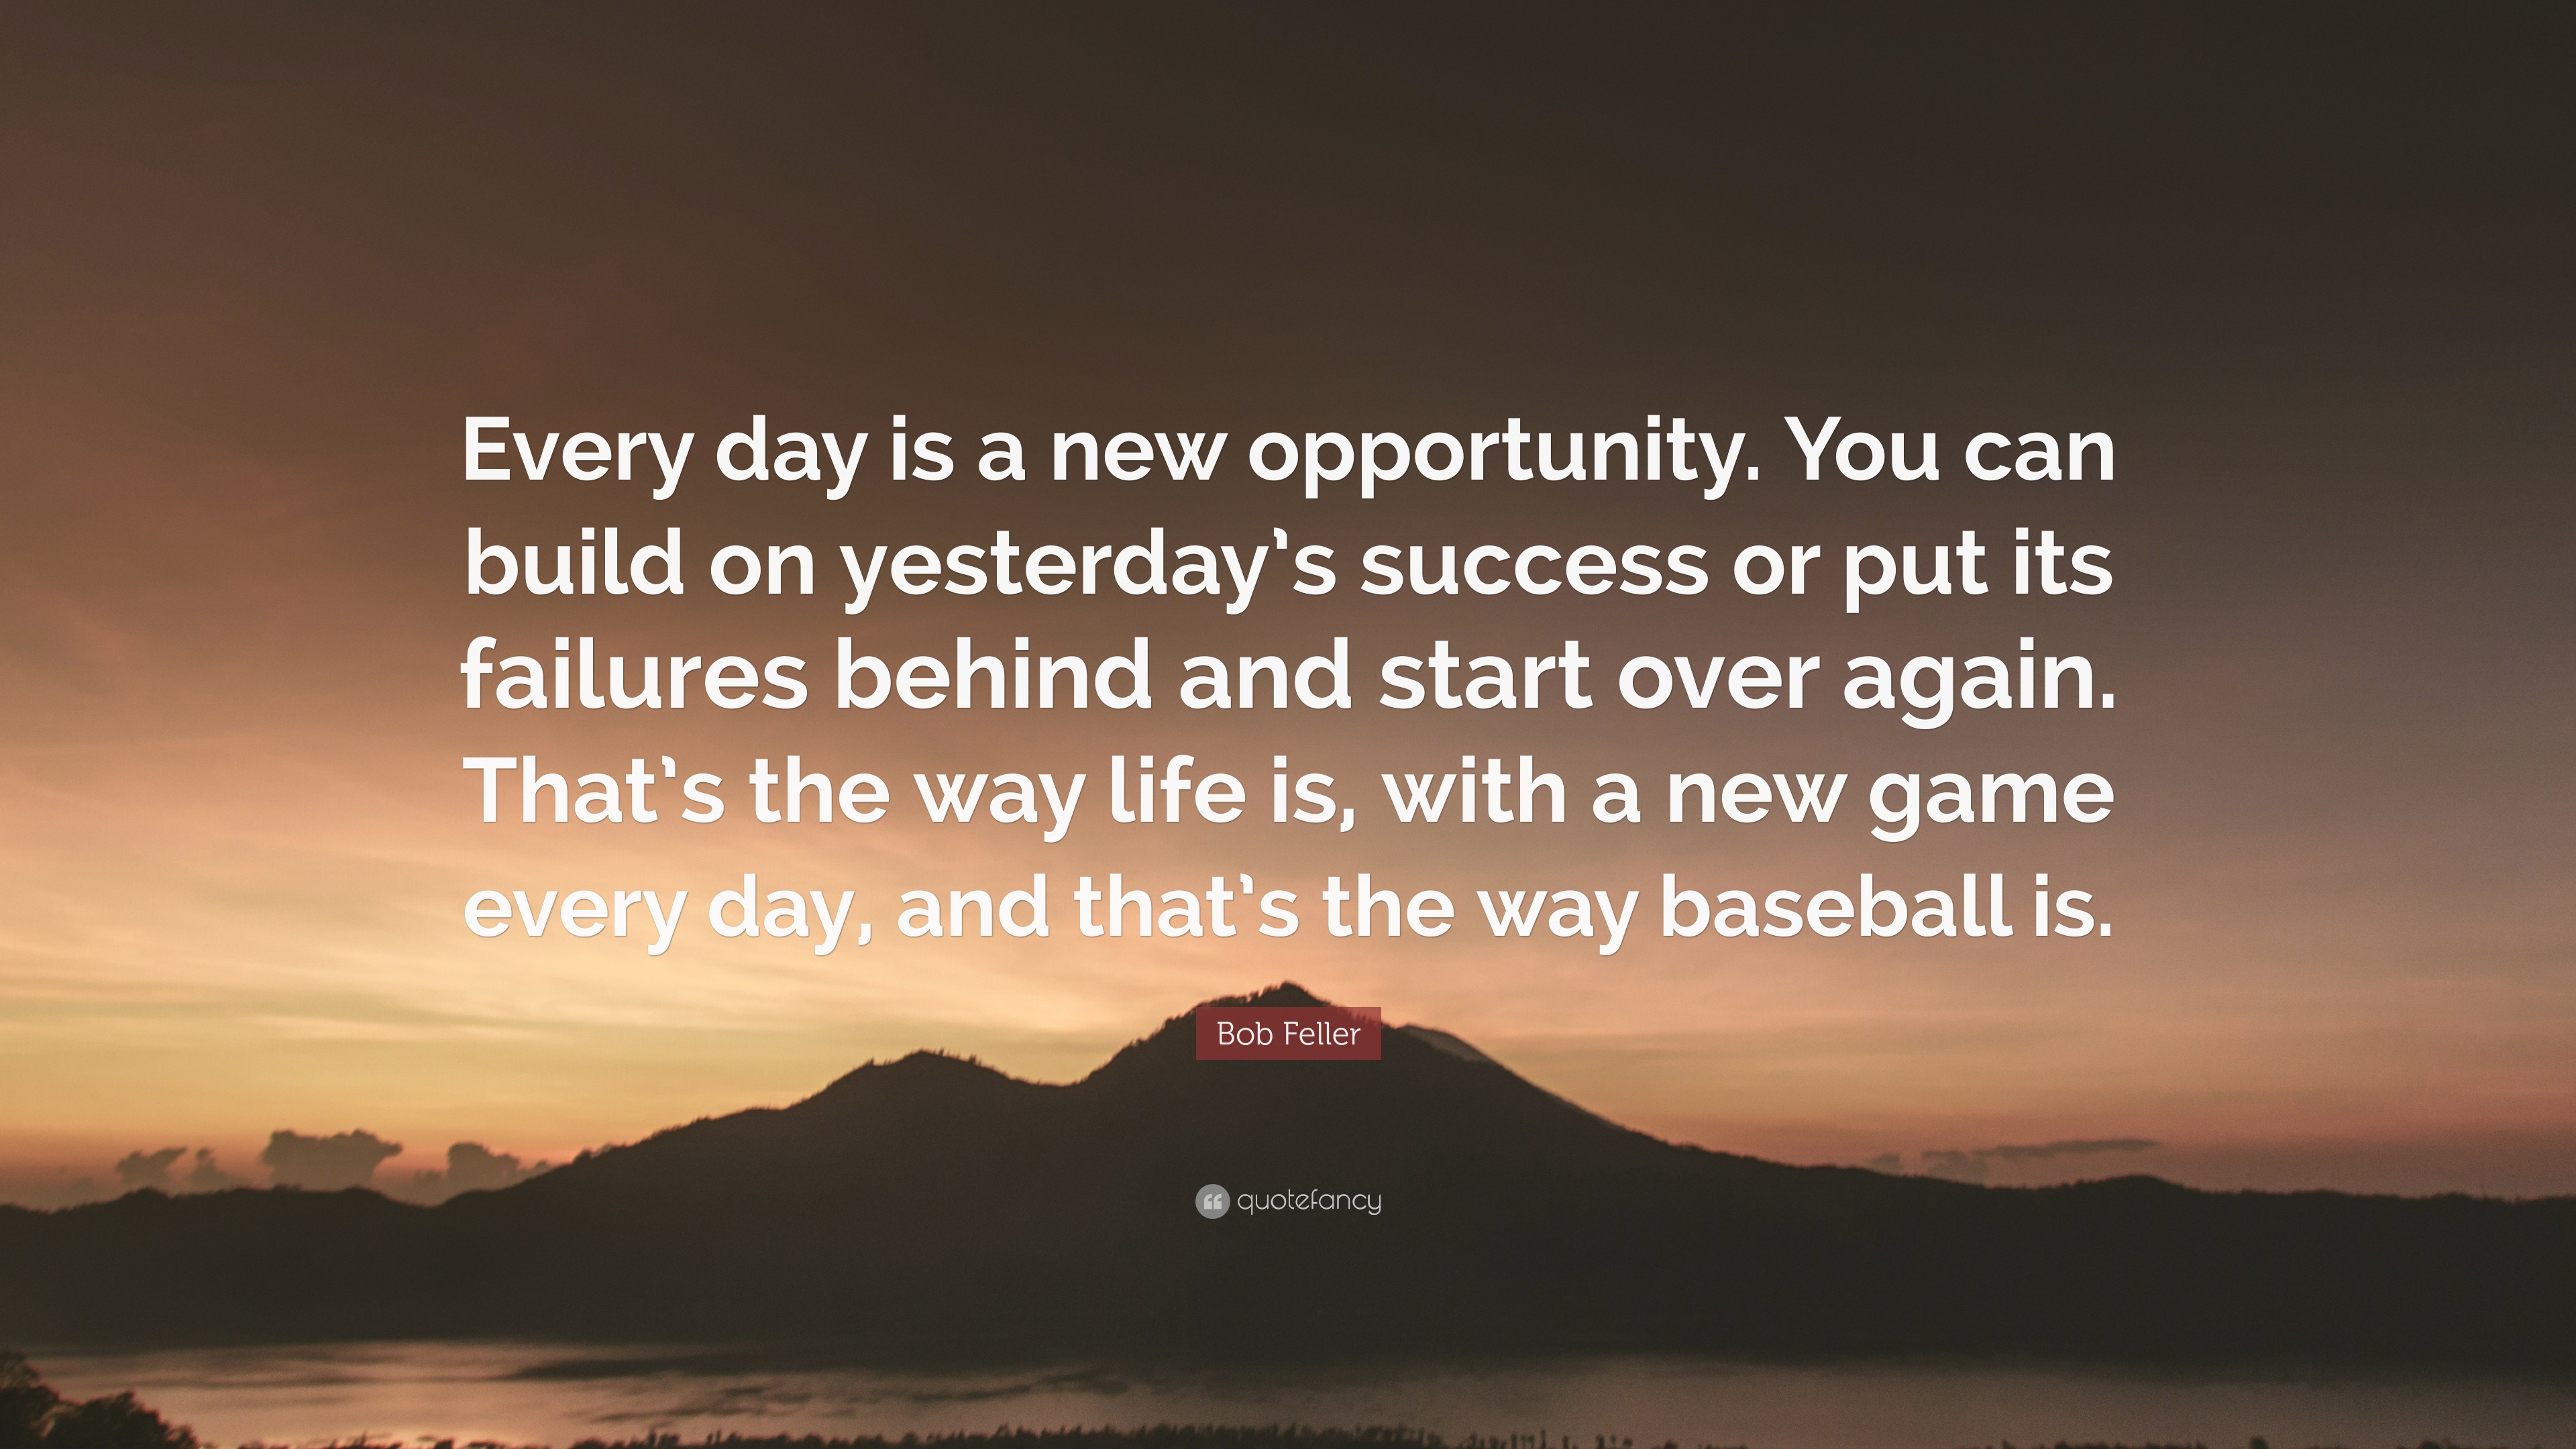 Bob Feller Quote Every Day Is A New Opportunity You Can Build On Yesterday S Success Or Put Its Failures Behind And Start Over Again Th 7 Wallpapers Quotefancy